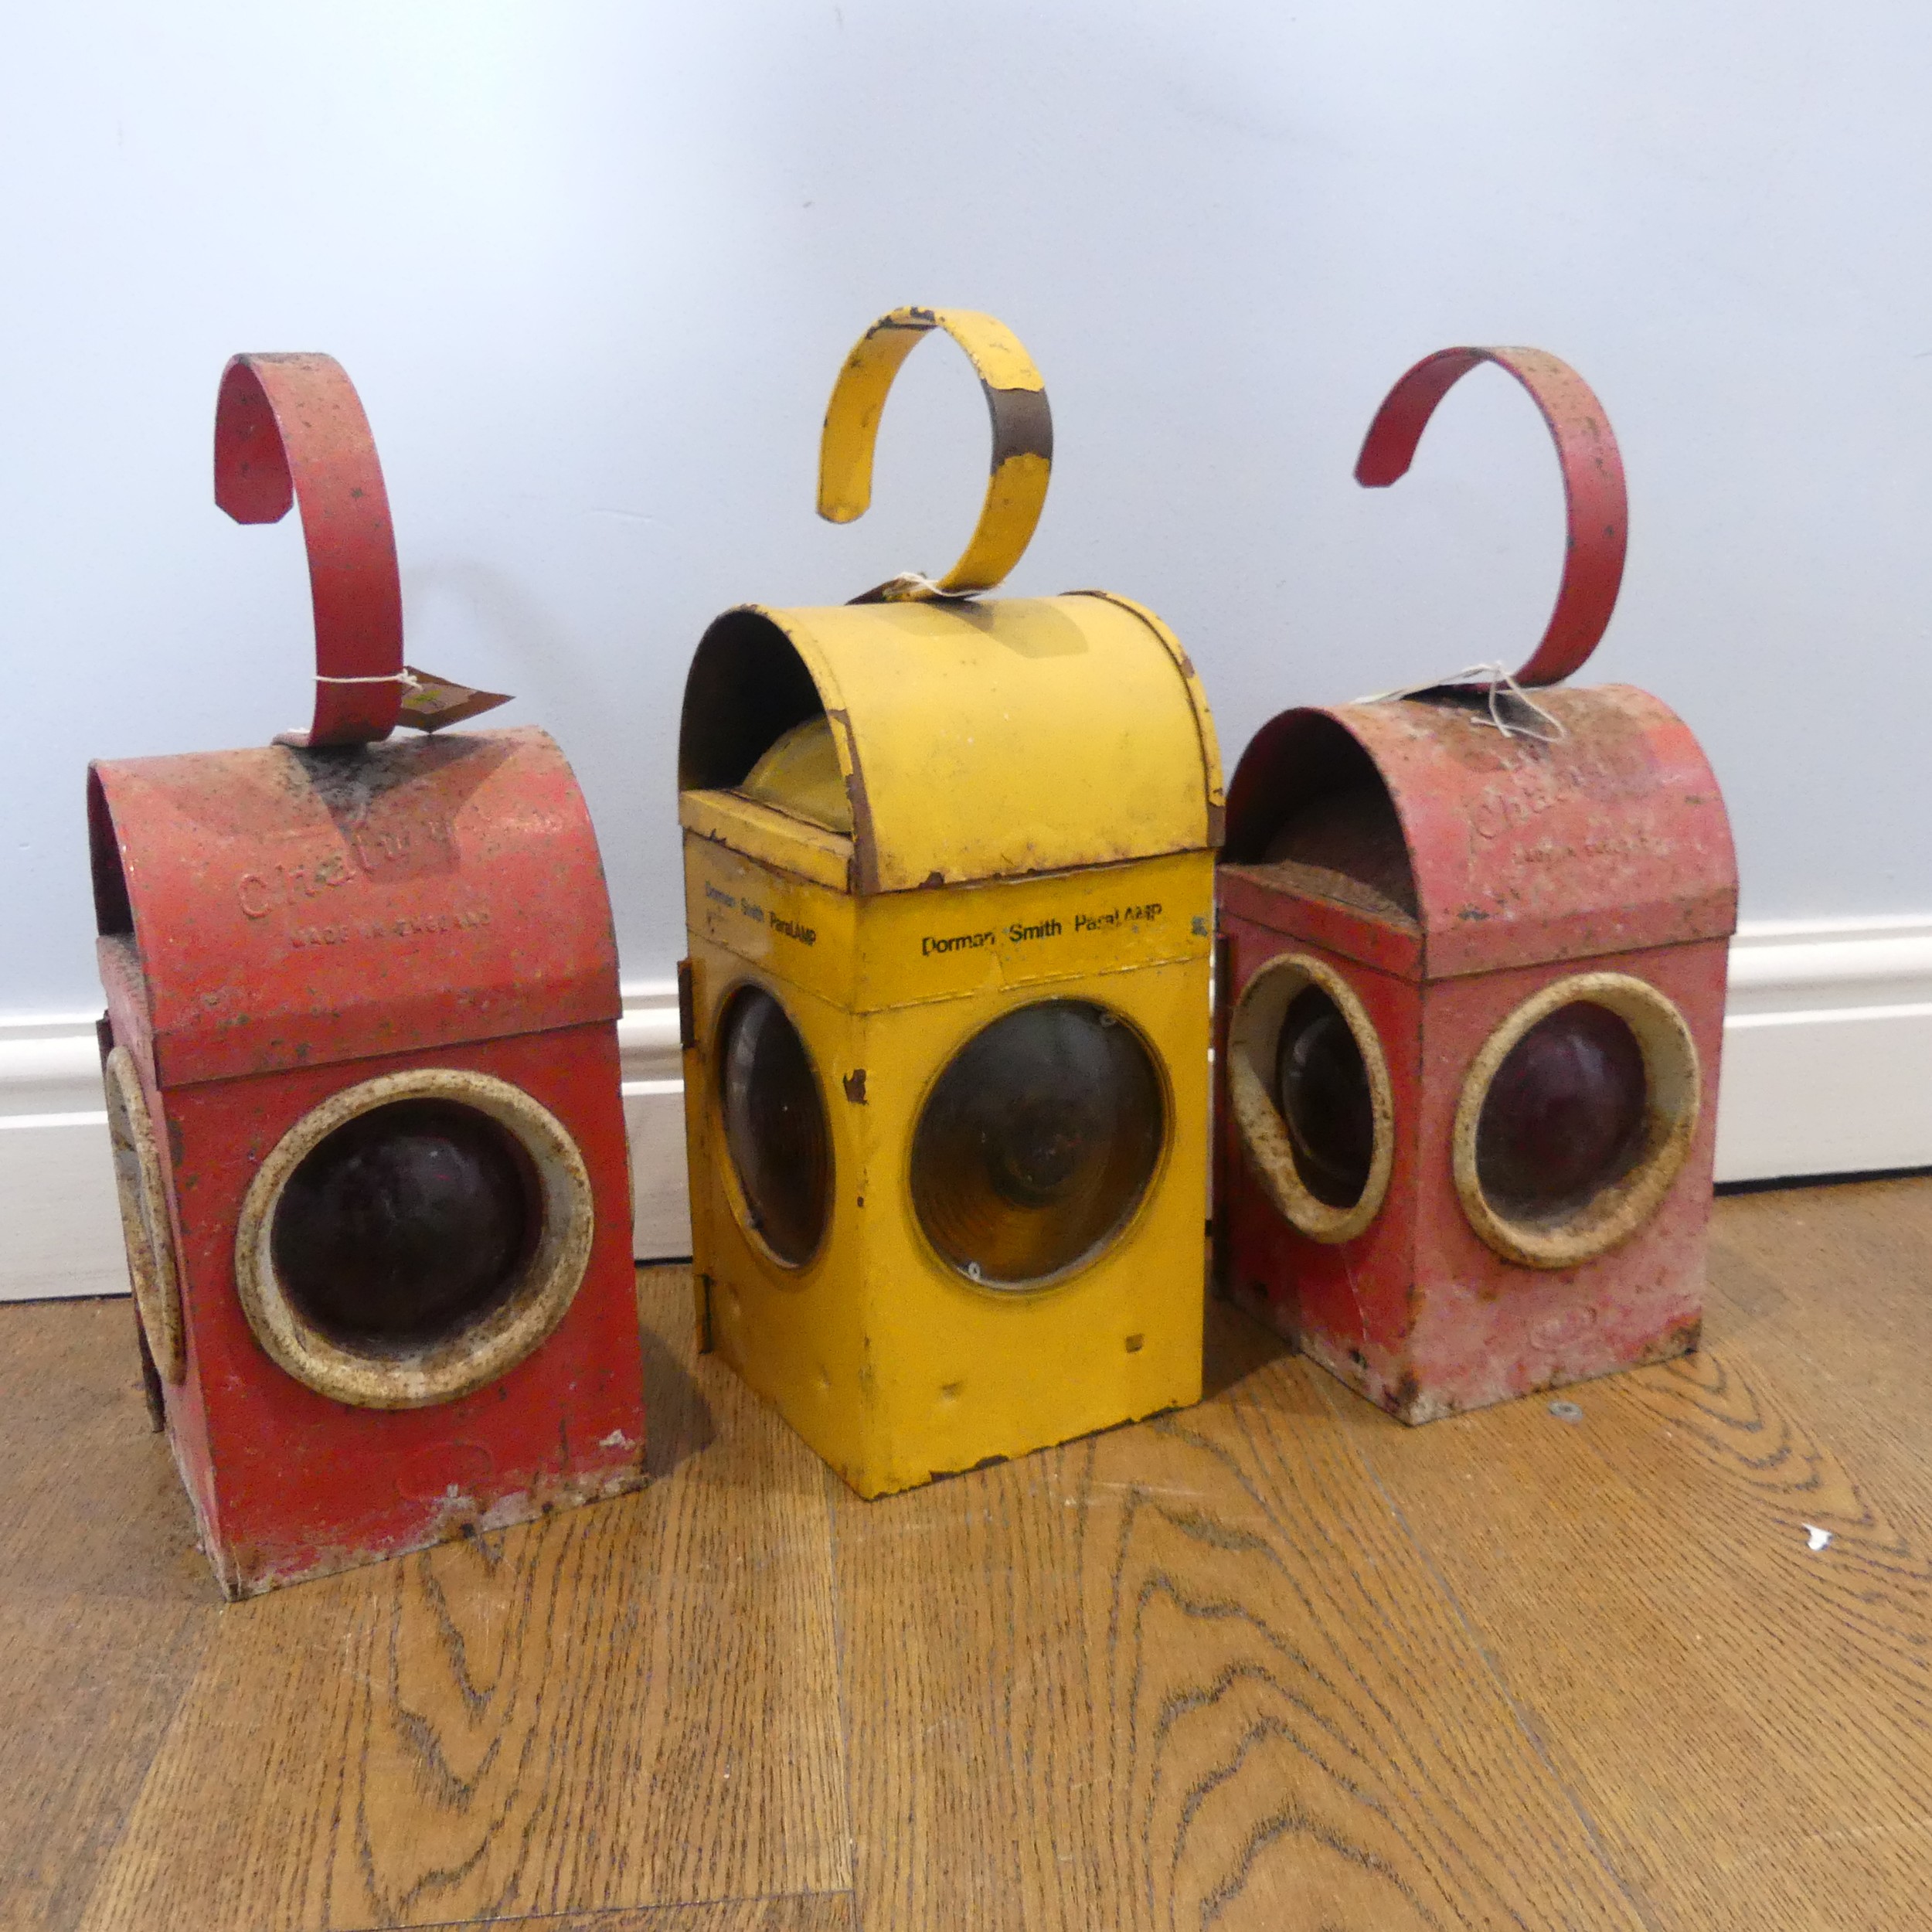 Road Lamps, three road lamps, two Chalwyn lamps, red, and a Dorman Smith Paralamp, yellow, with